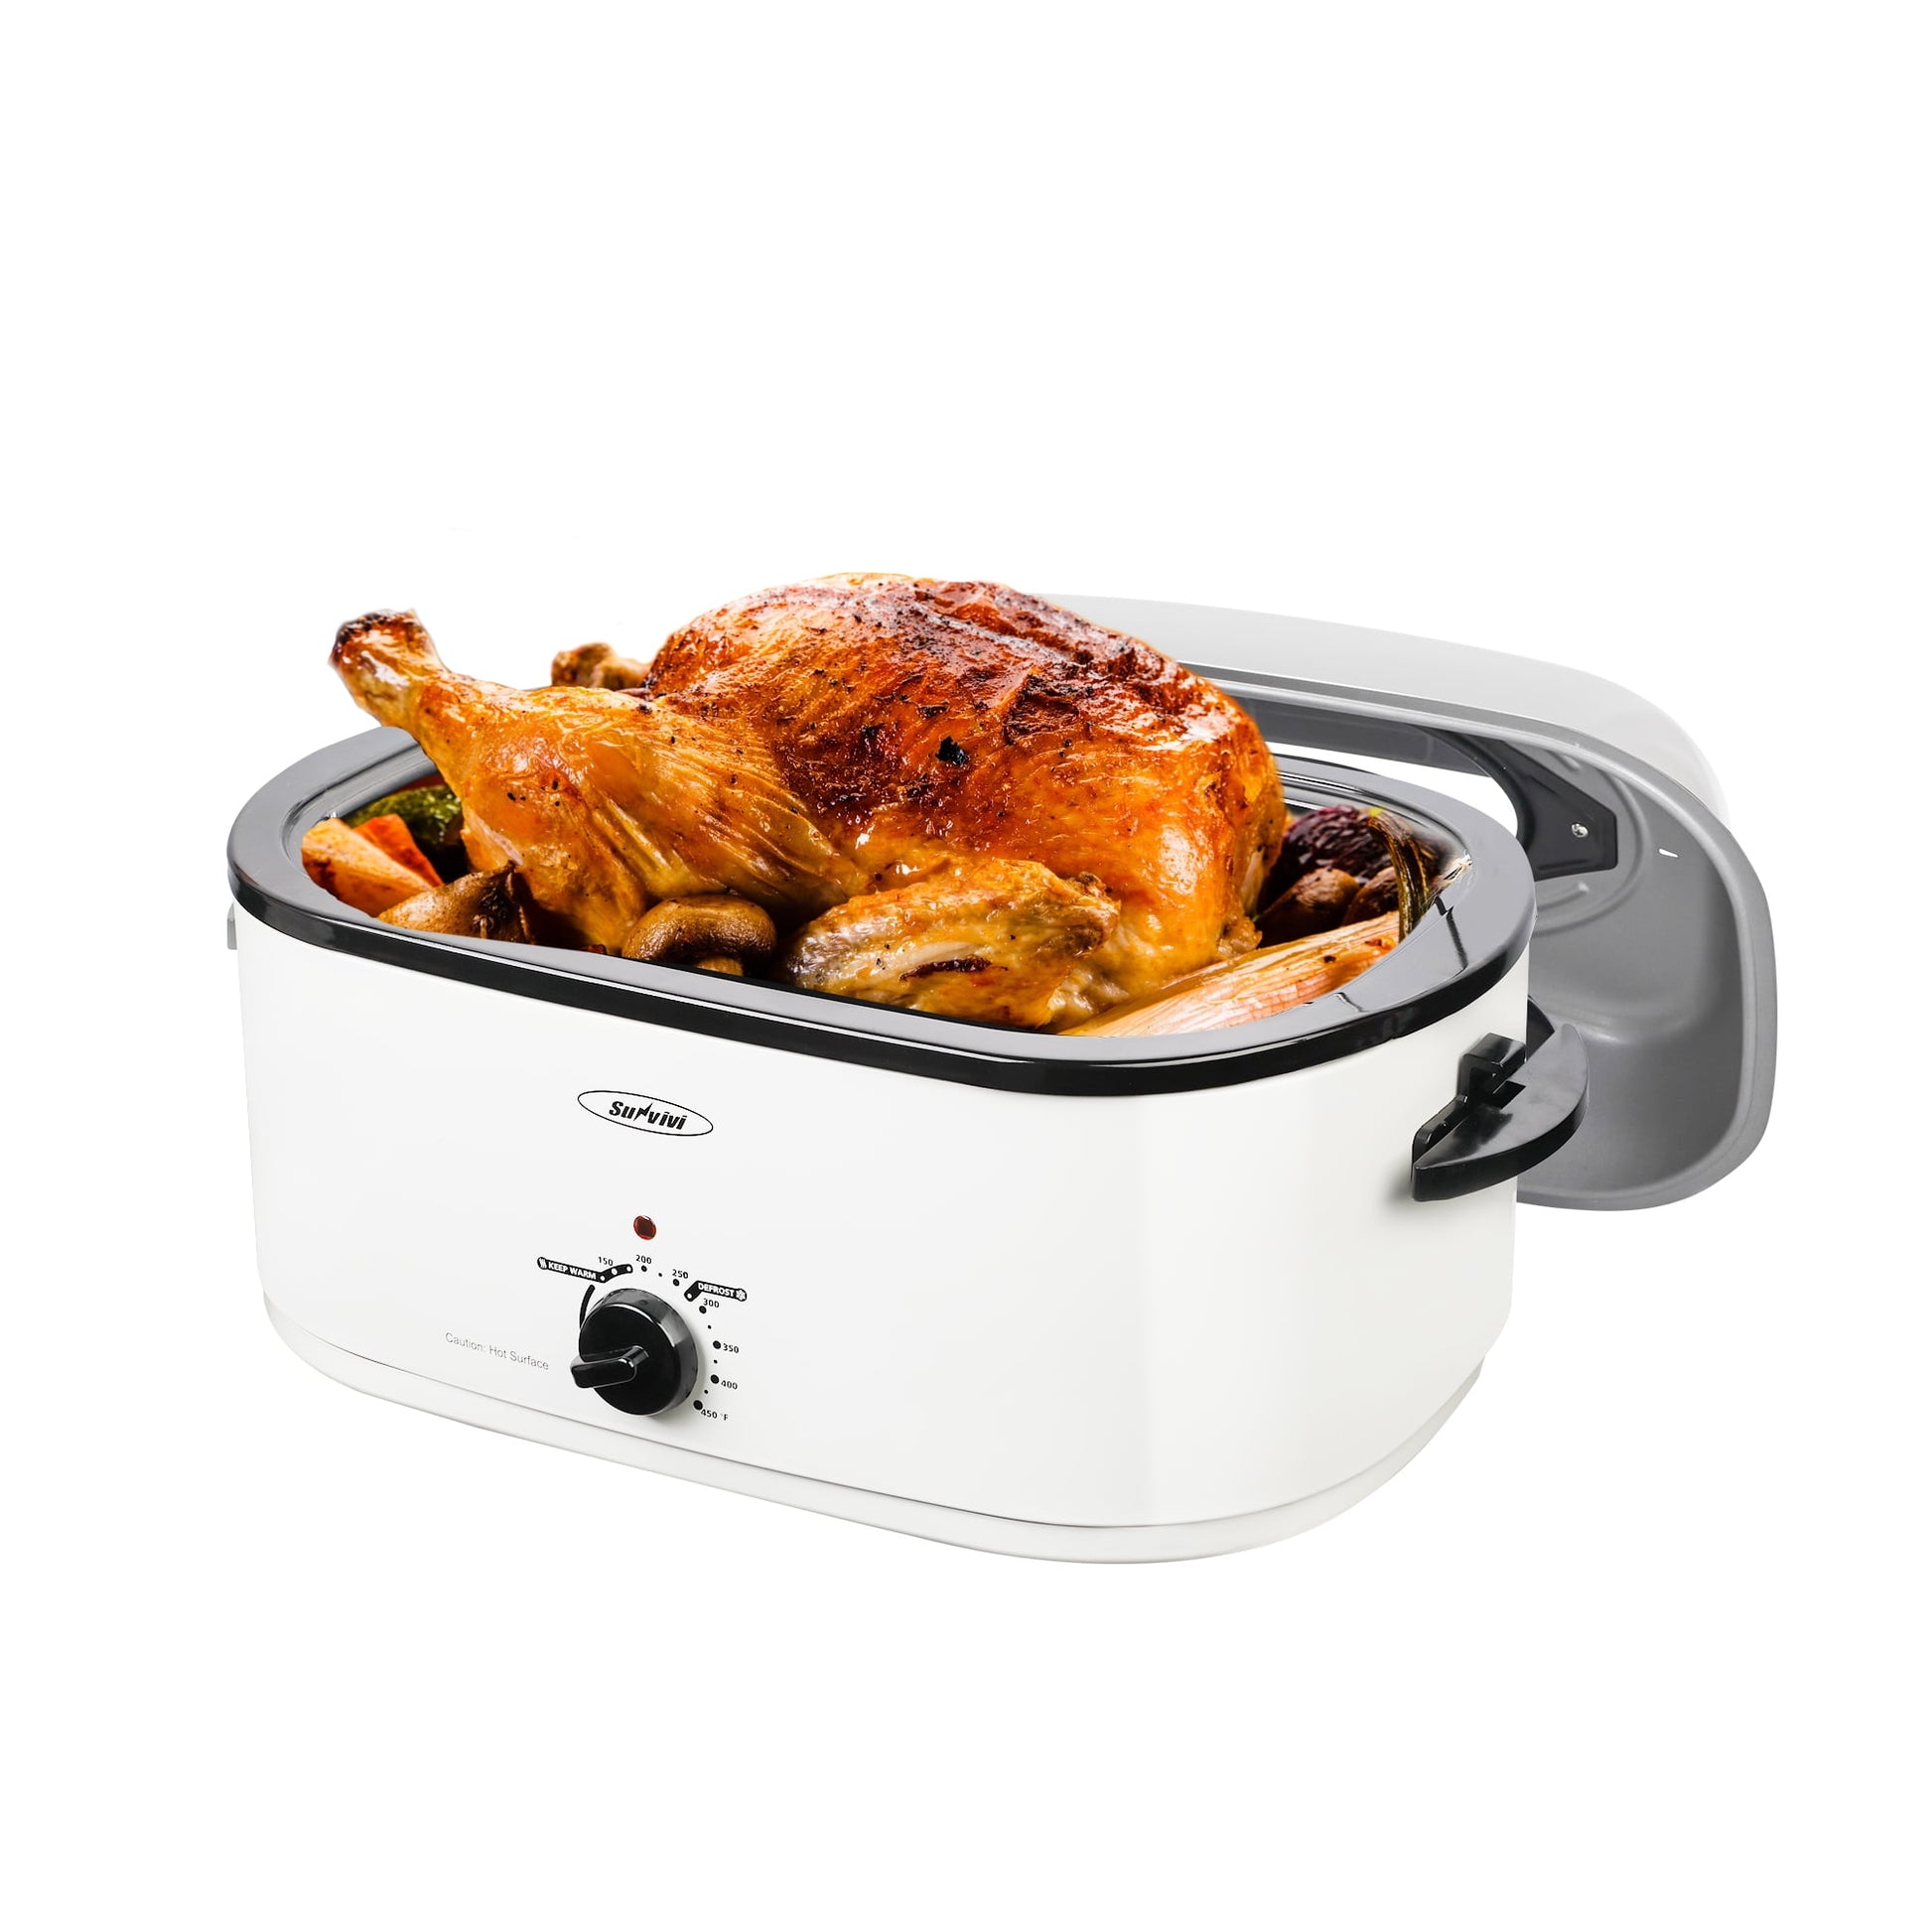 https://royalcraft.store/cdn/shop/files/RoyalCraft-22-Quart-Electric-Roaster-Oven-with-Visible-Self-Basting-Lid-Stainless-Steel-White_1644b0cf-16a1-4370-9ce0-d6d282e5d52e.1bccdcc100cd16acccd58db4ba0041b2.jpg?v=1696840232&width=1946